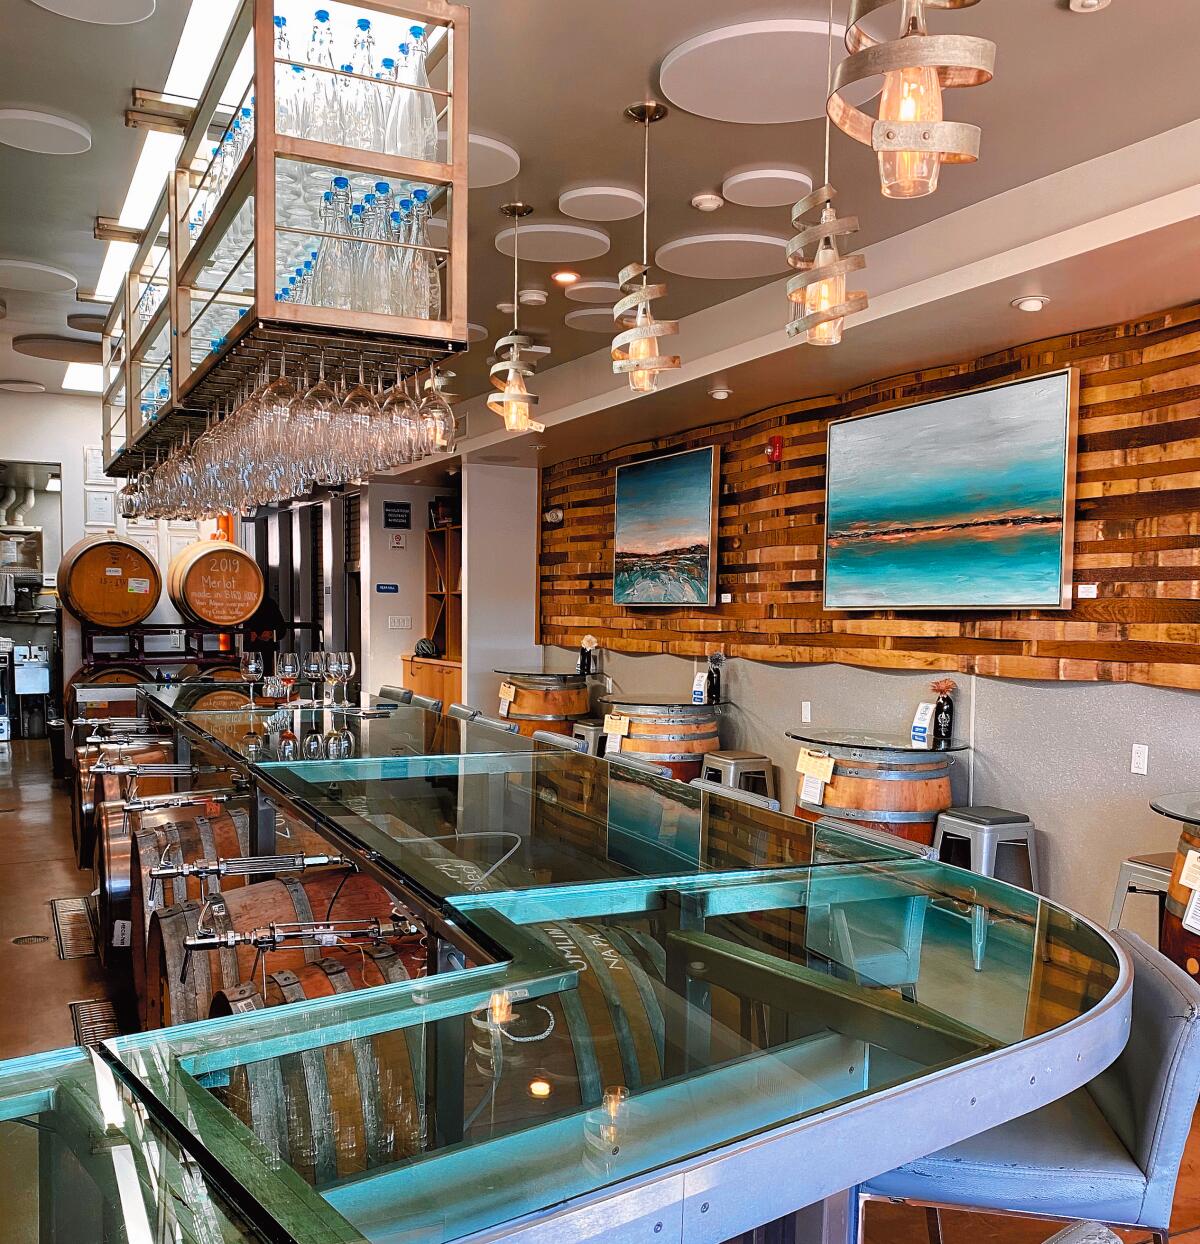 LJ Crafted Wines in Bird Rock is contributing to the zero-waste movement. LJ Crafted Wines is open 4-10 p.m. Monday-Thursday; 1-11 p.m. Friday-Saturday; and 2-8 p.m. Sunday at 5621 La Jolla Blvd., La Jolla. (858) 551-8890. ljcraftedwines.com